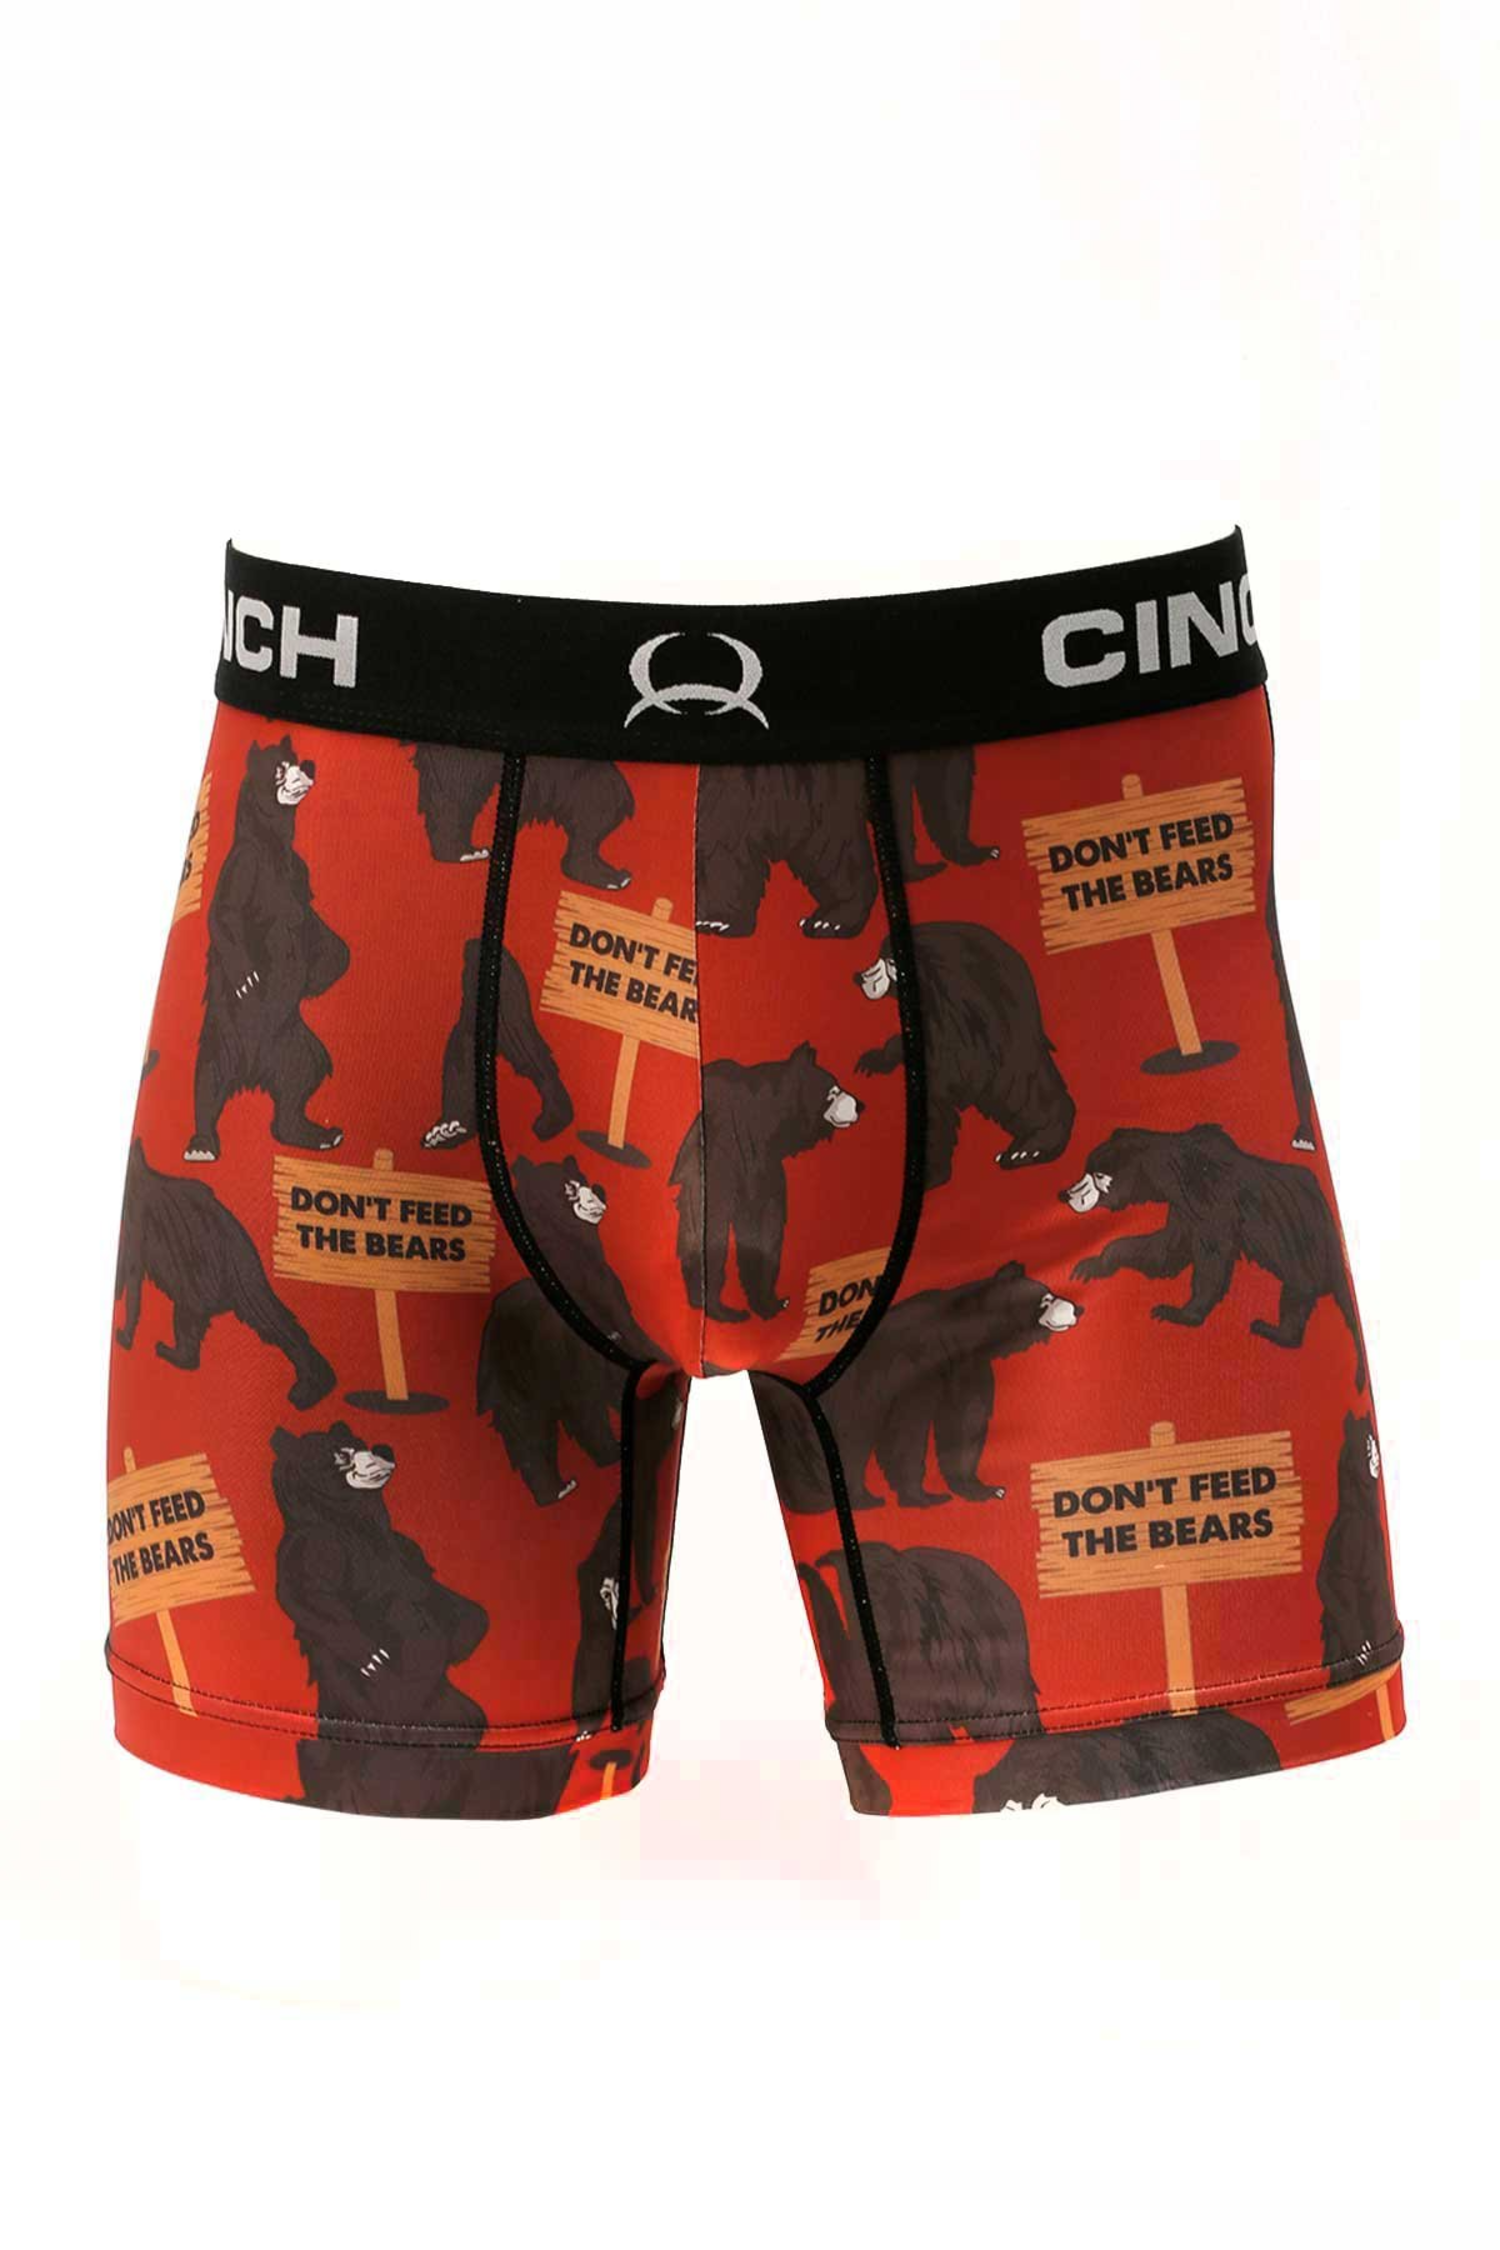 Cinch 6 Bears Boxer Briefs Red